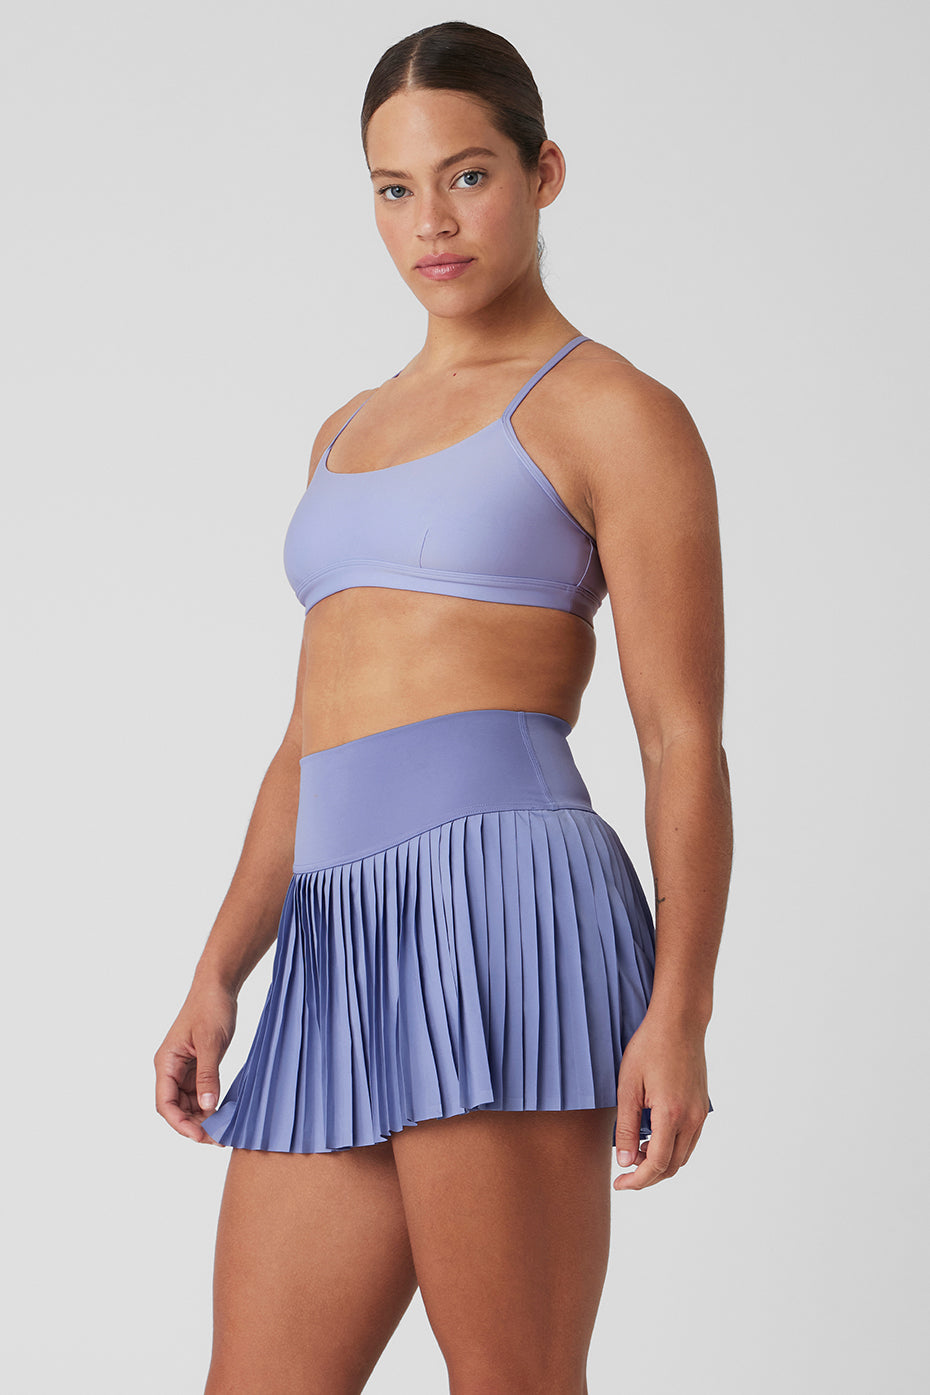 Airlift Intrigue Bra - Lilac Blue